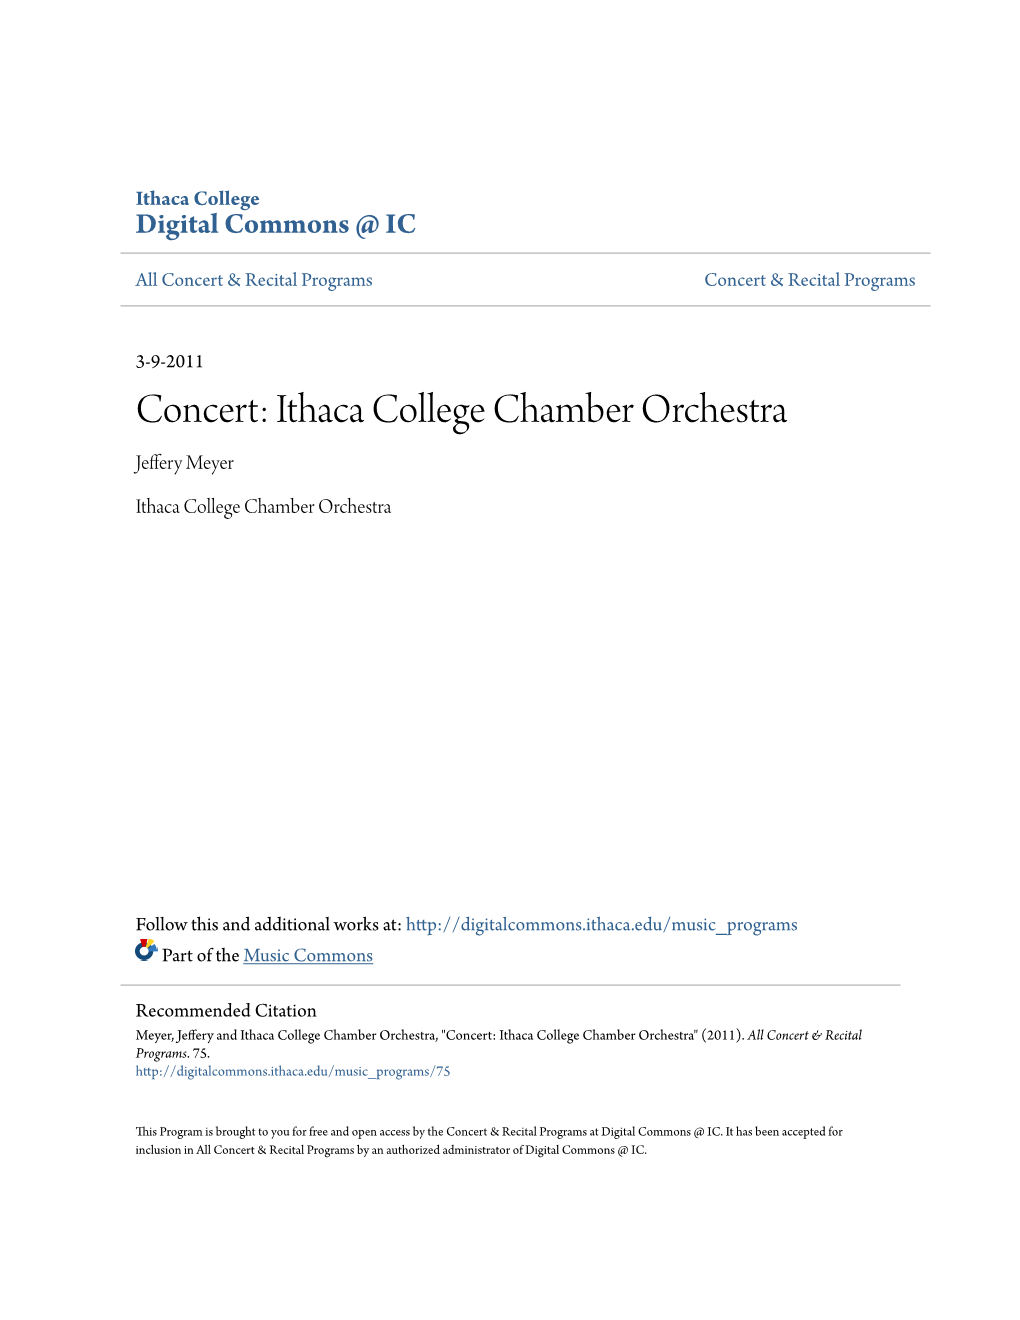 Concert: Ithaca College Chamber Orchestra Jeffery Meyer